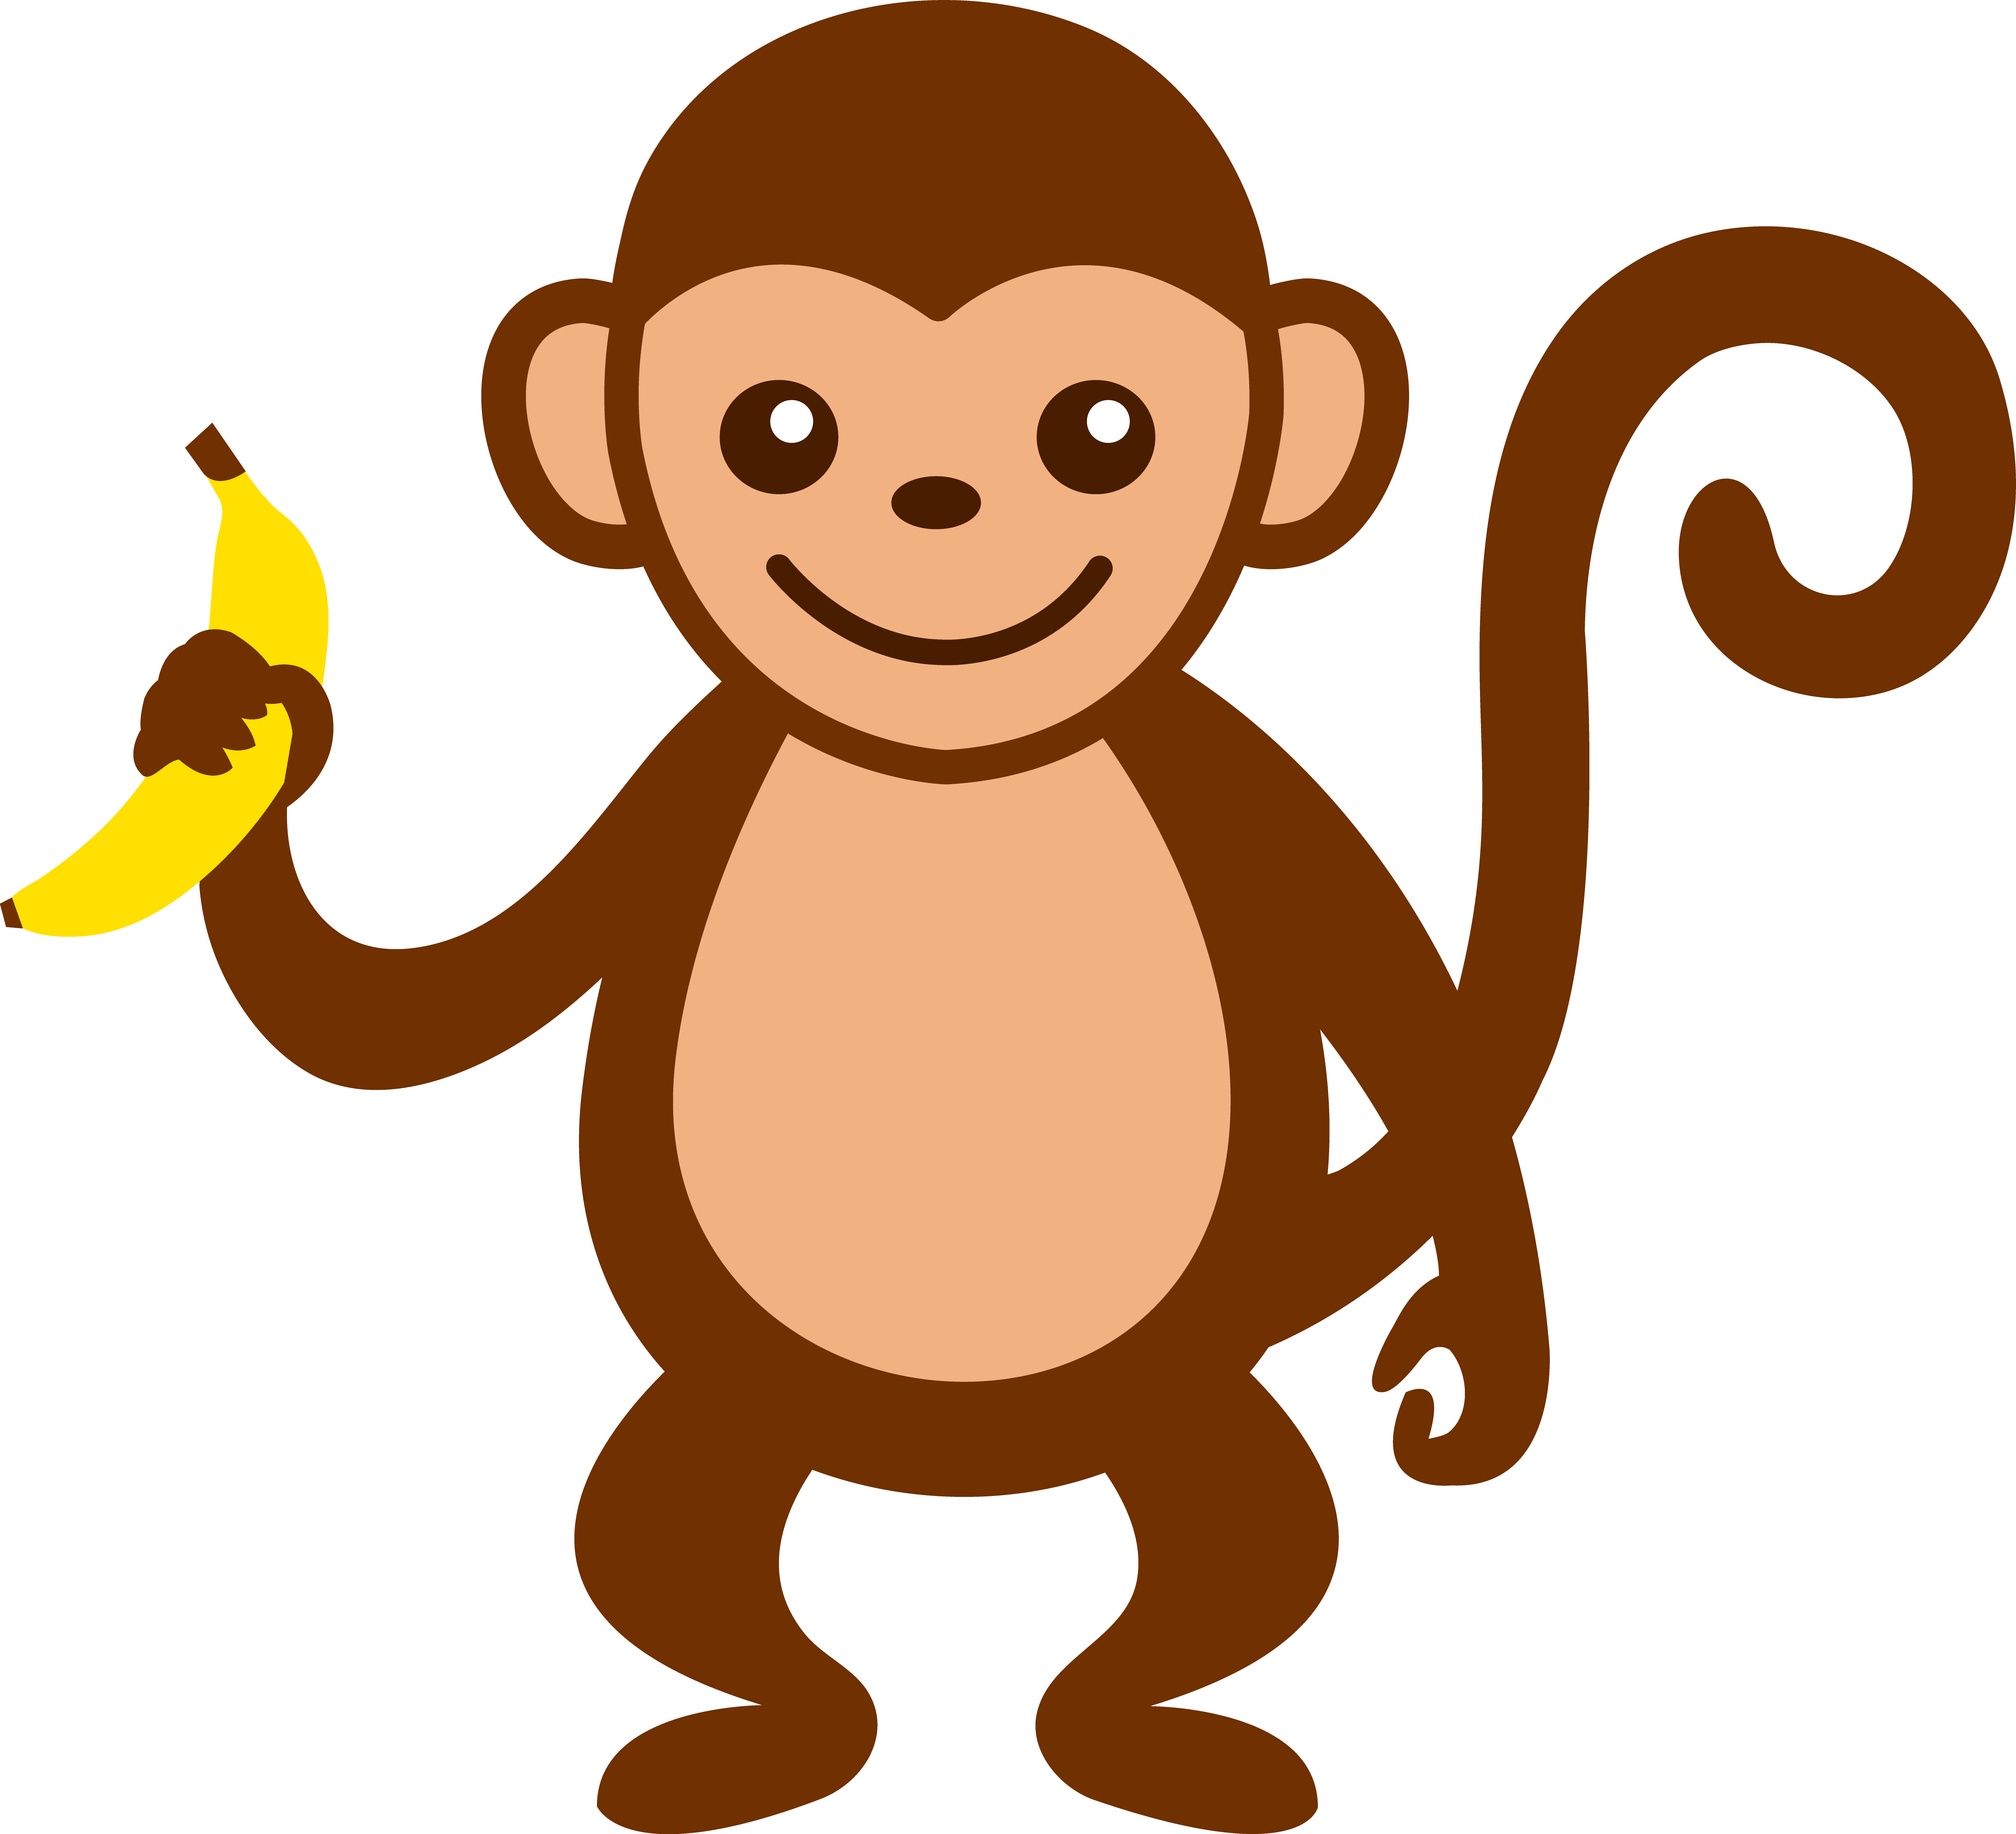 clipart of monkey face - photo #41